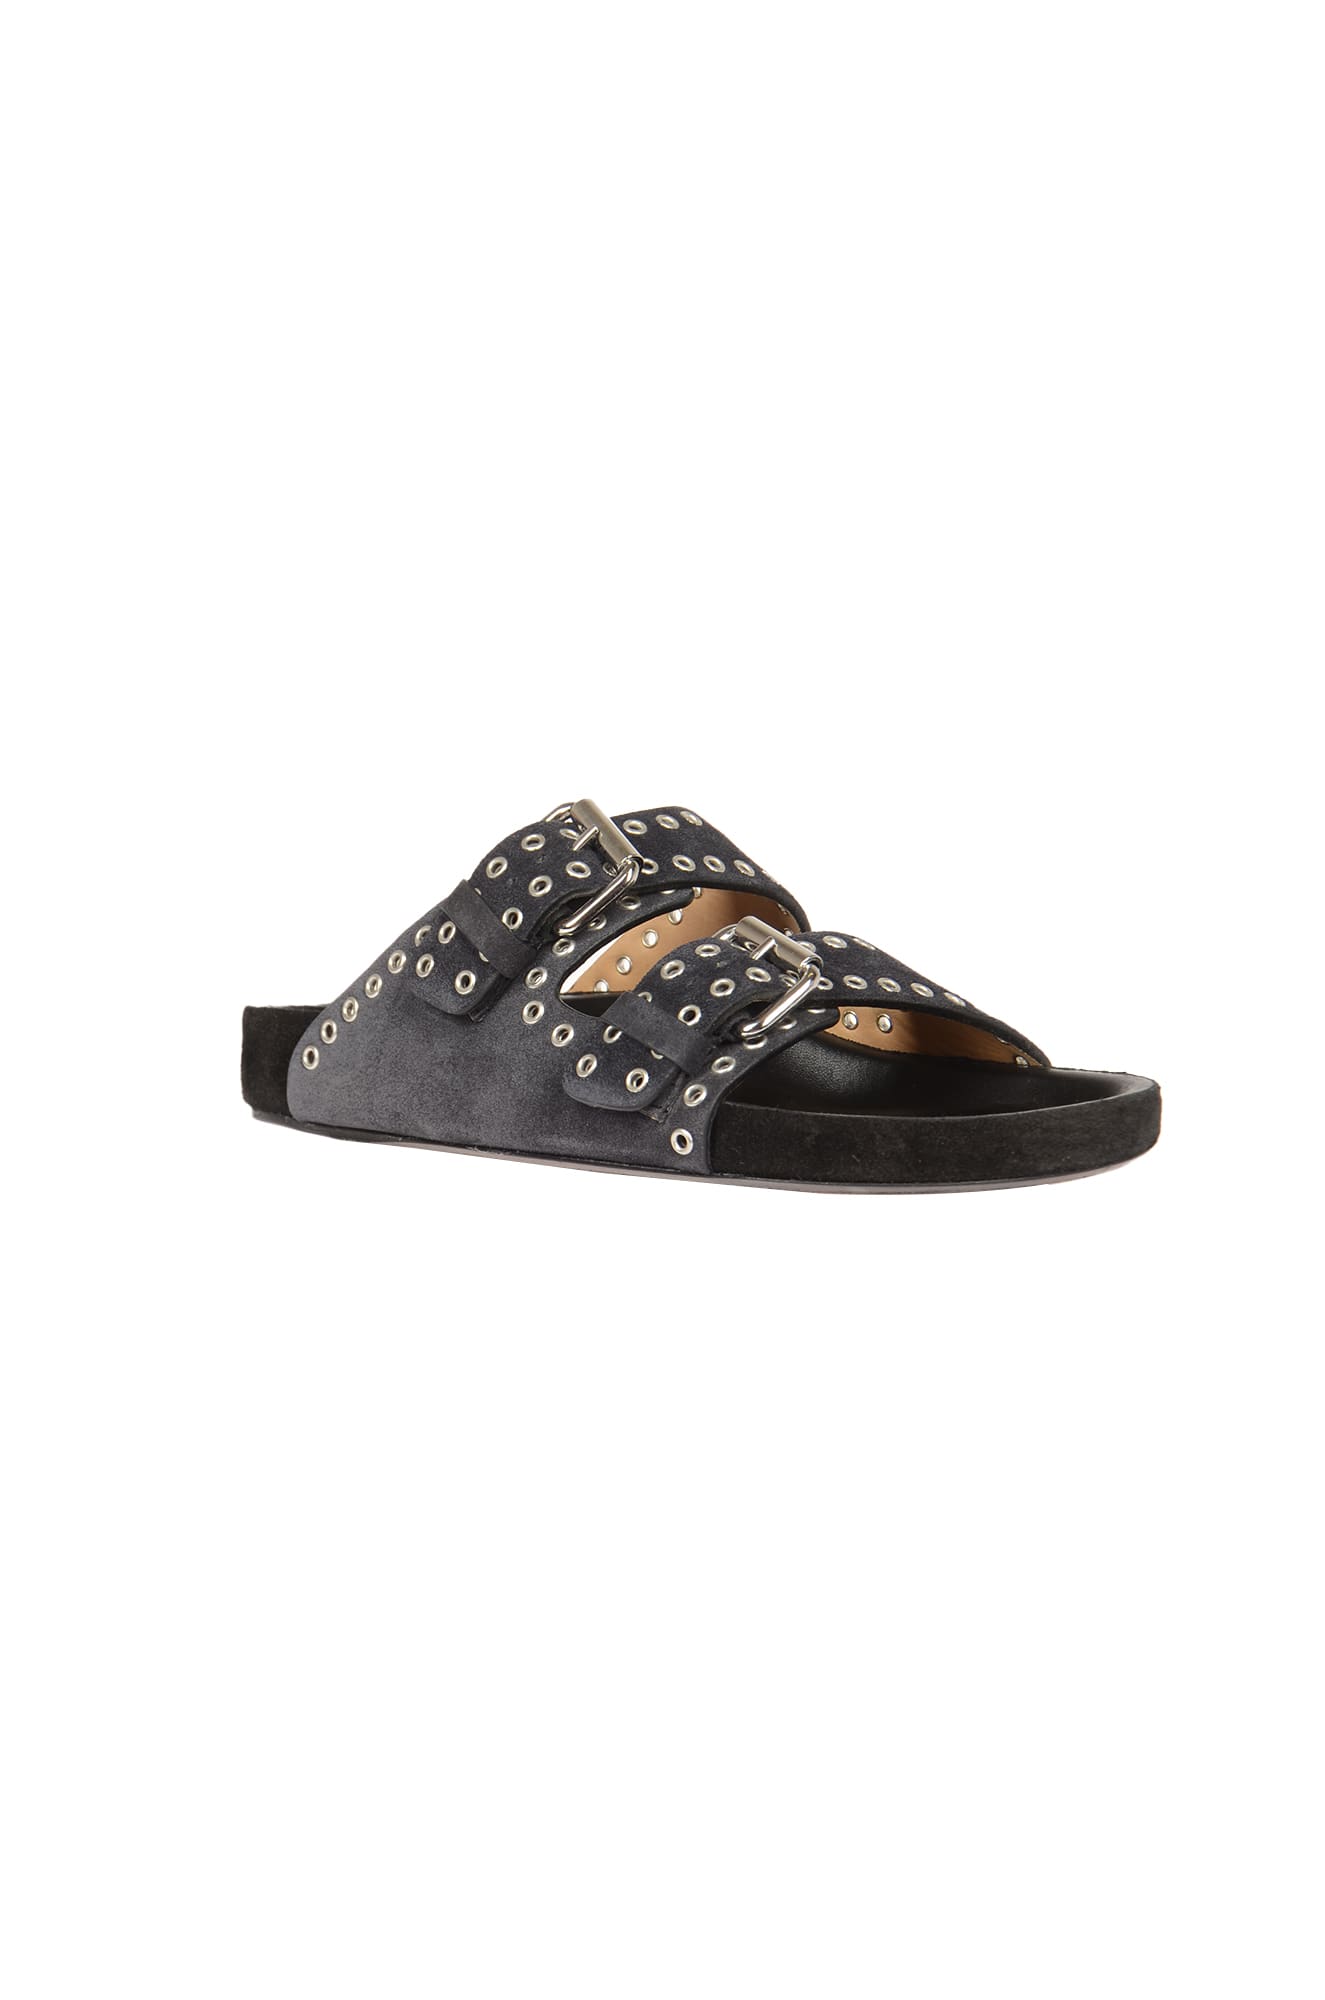 Isabel Marant Black Lennyo Studded Suede Sandals In Faded Black | ModeSens